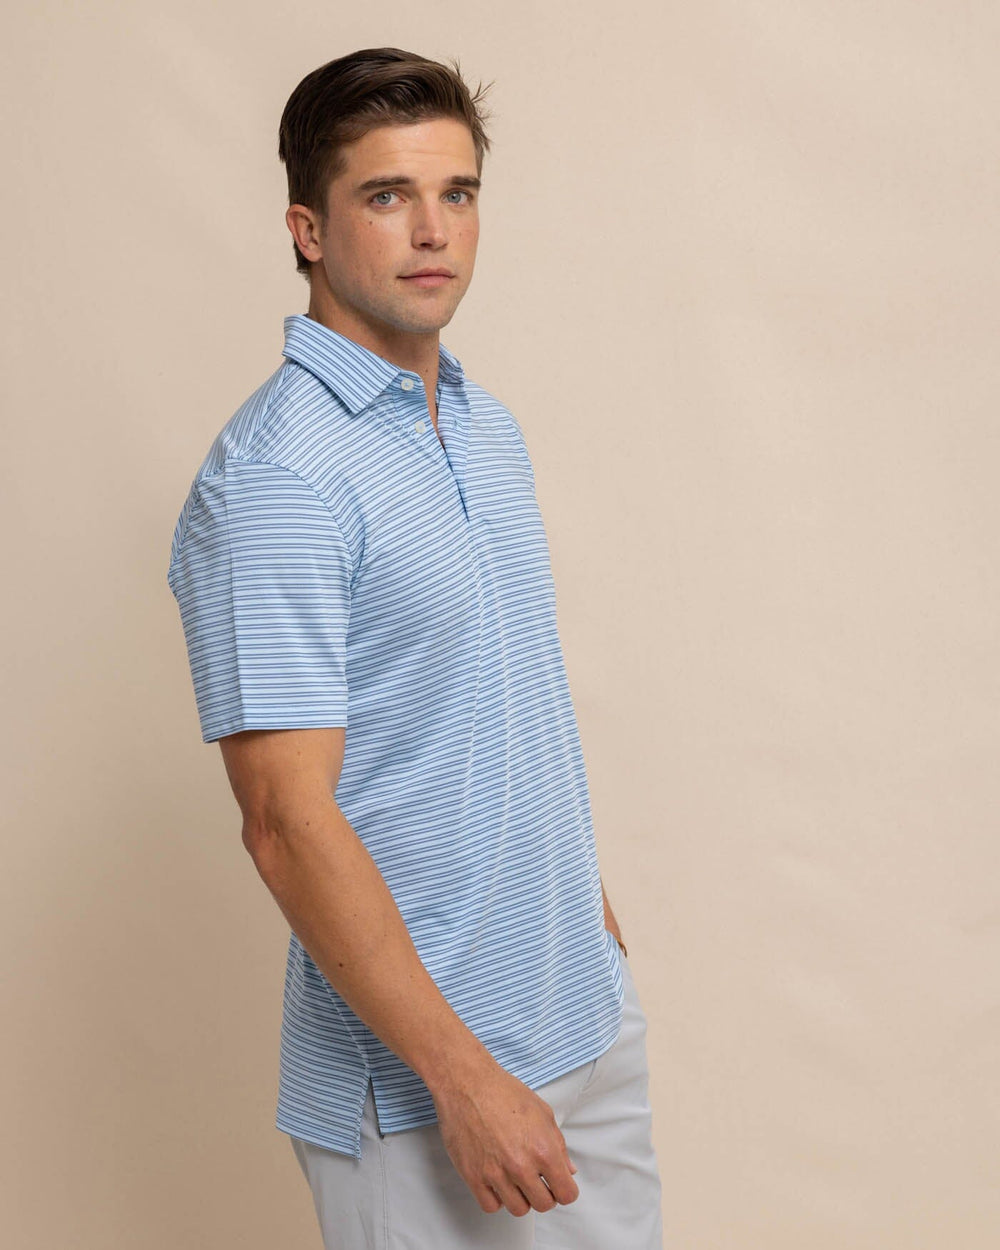 The front view of the Southern Tide Driver Baywoods Stripe Polo by Southern Tide - Clearwater Blue